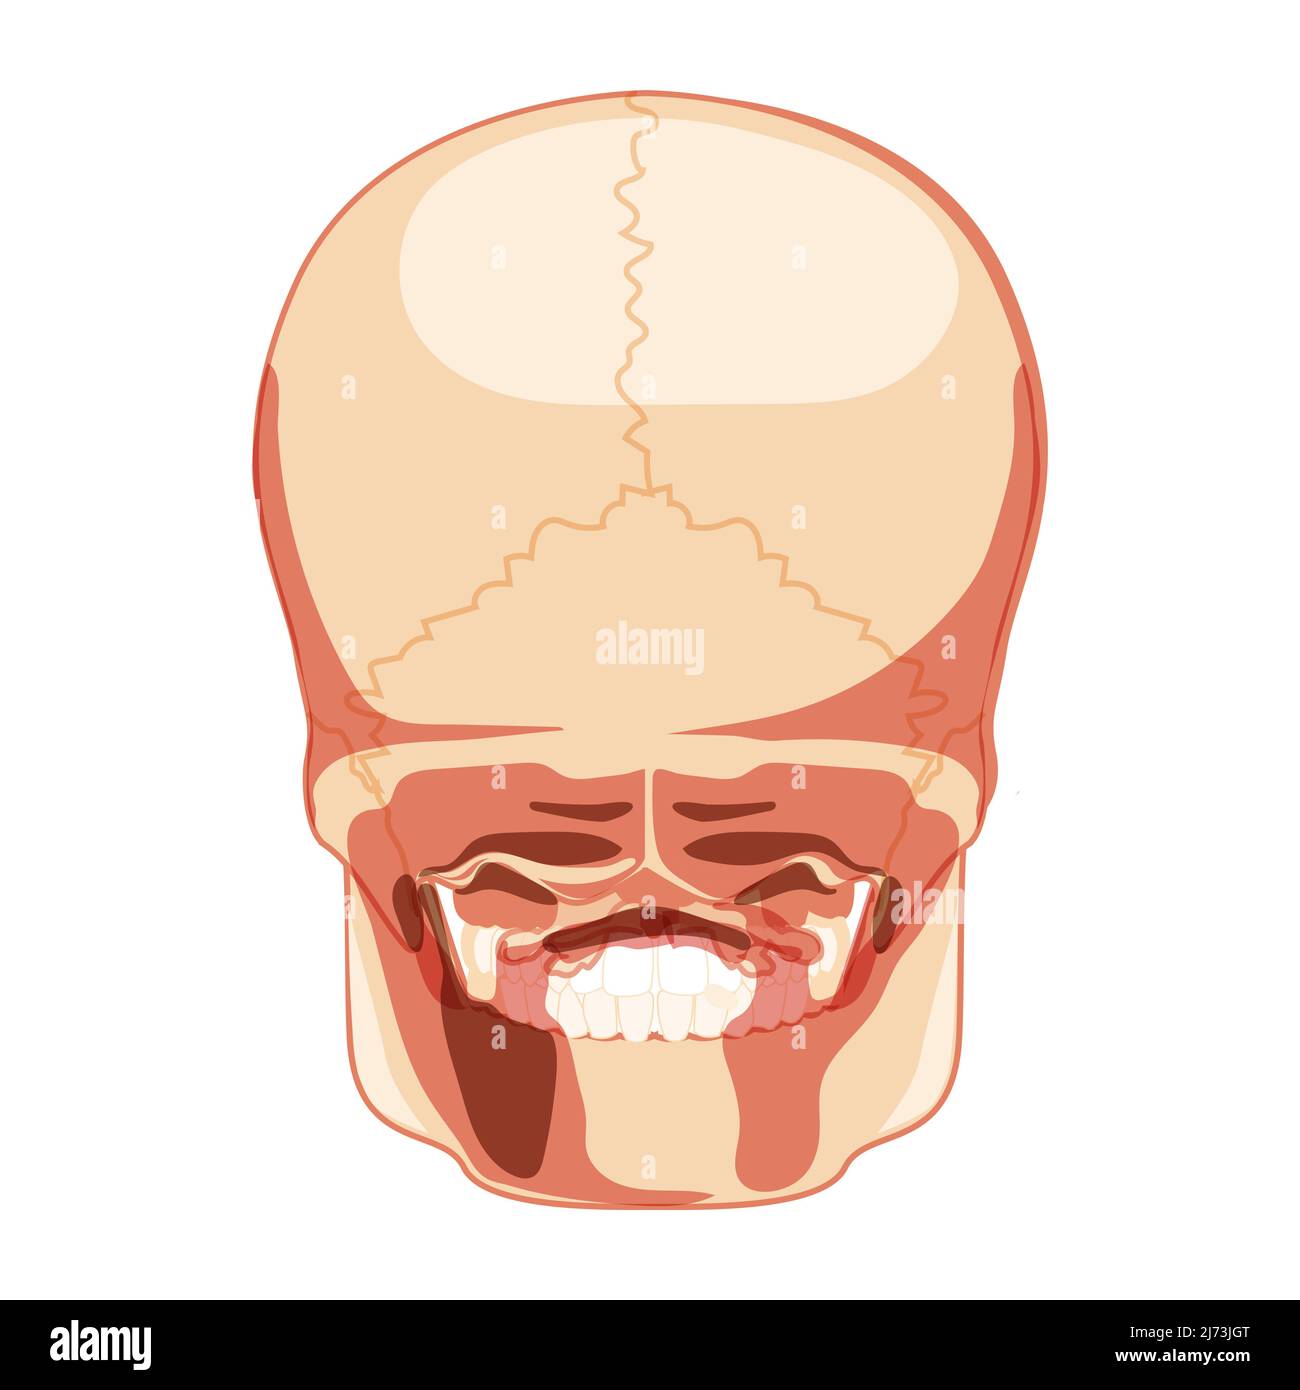 Skull Skeleton Human head back posterior view. Human jaws model. Set of chump realistic 3D flat natural color concept. Vector illustration of anatomy isolated on white background Stock Vector